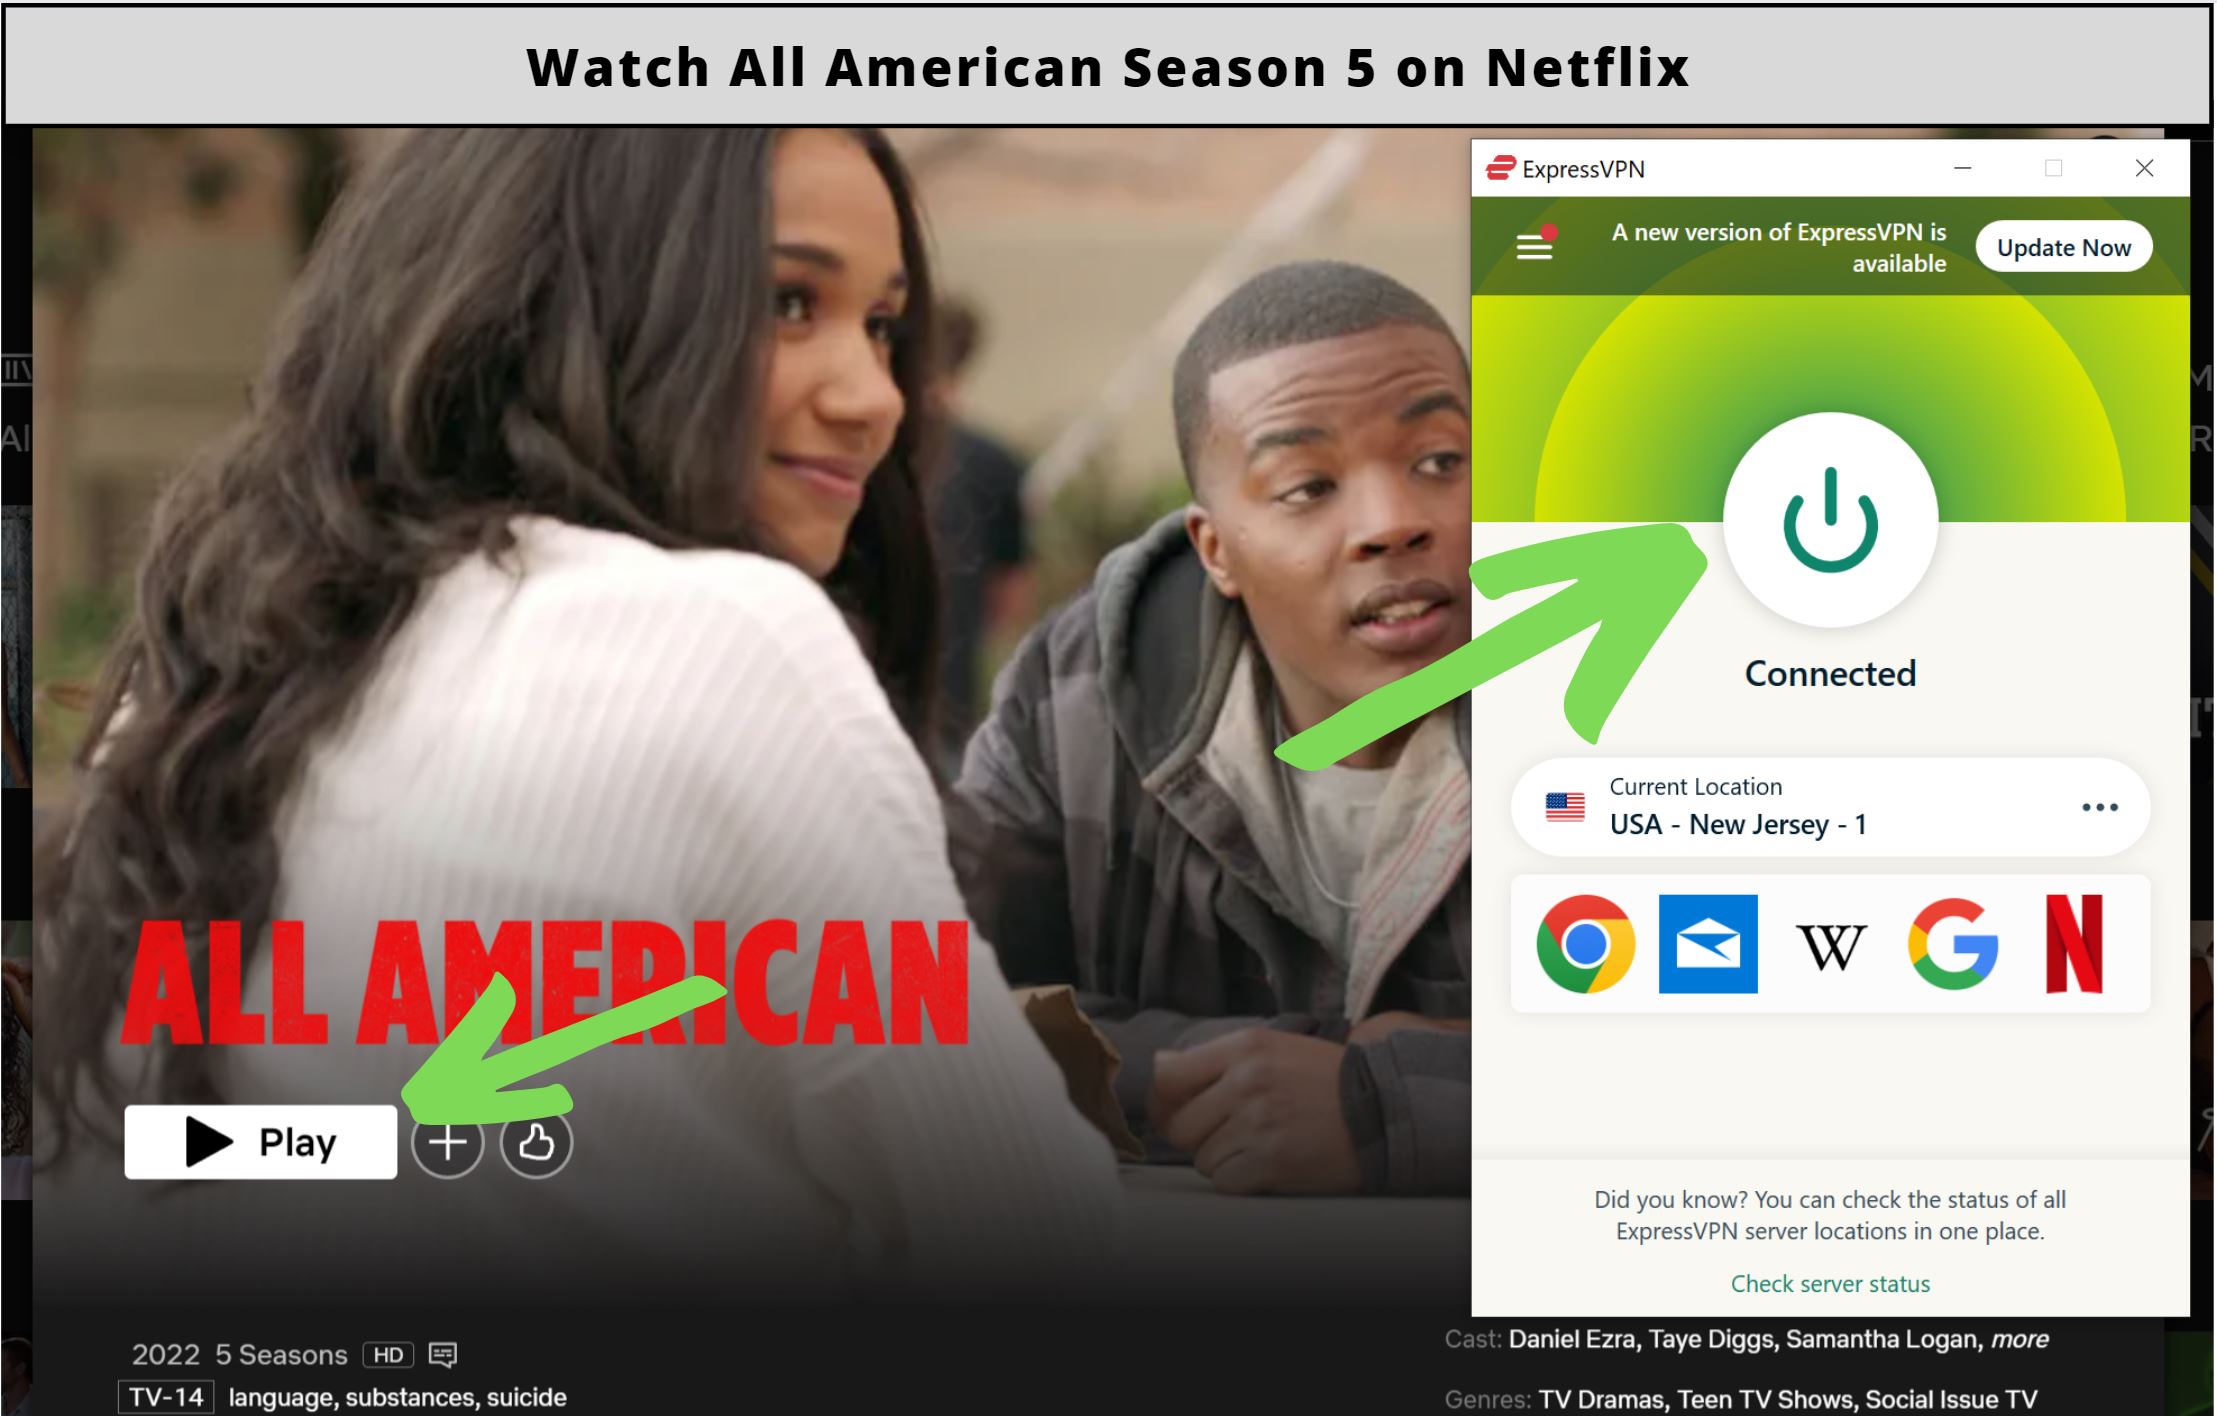 How to watch All American Season 5 on Netflix?